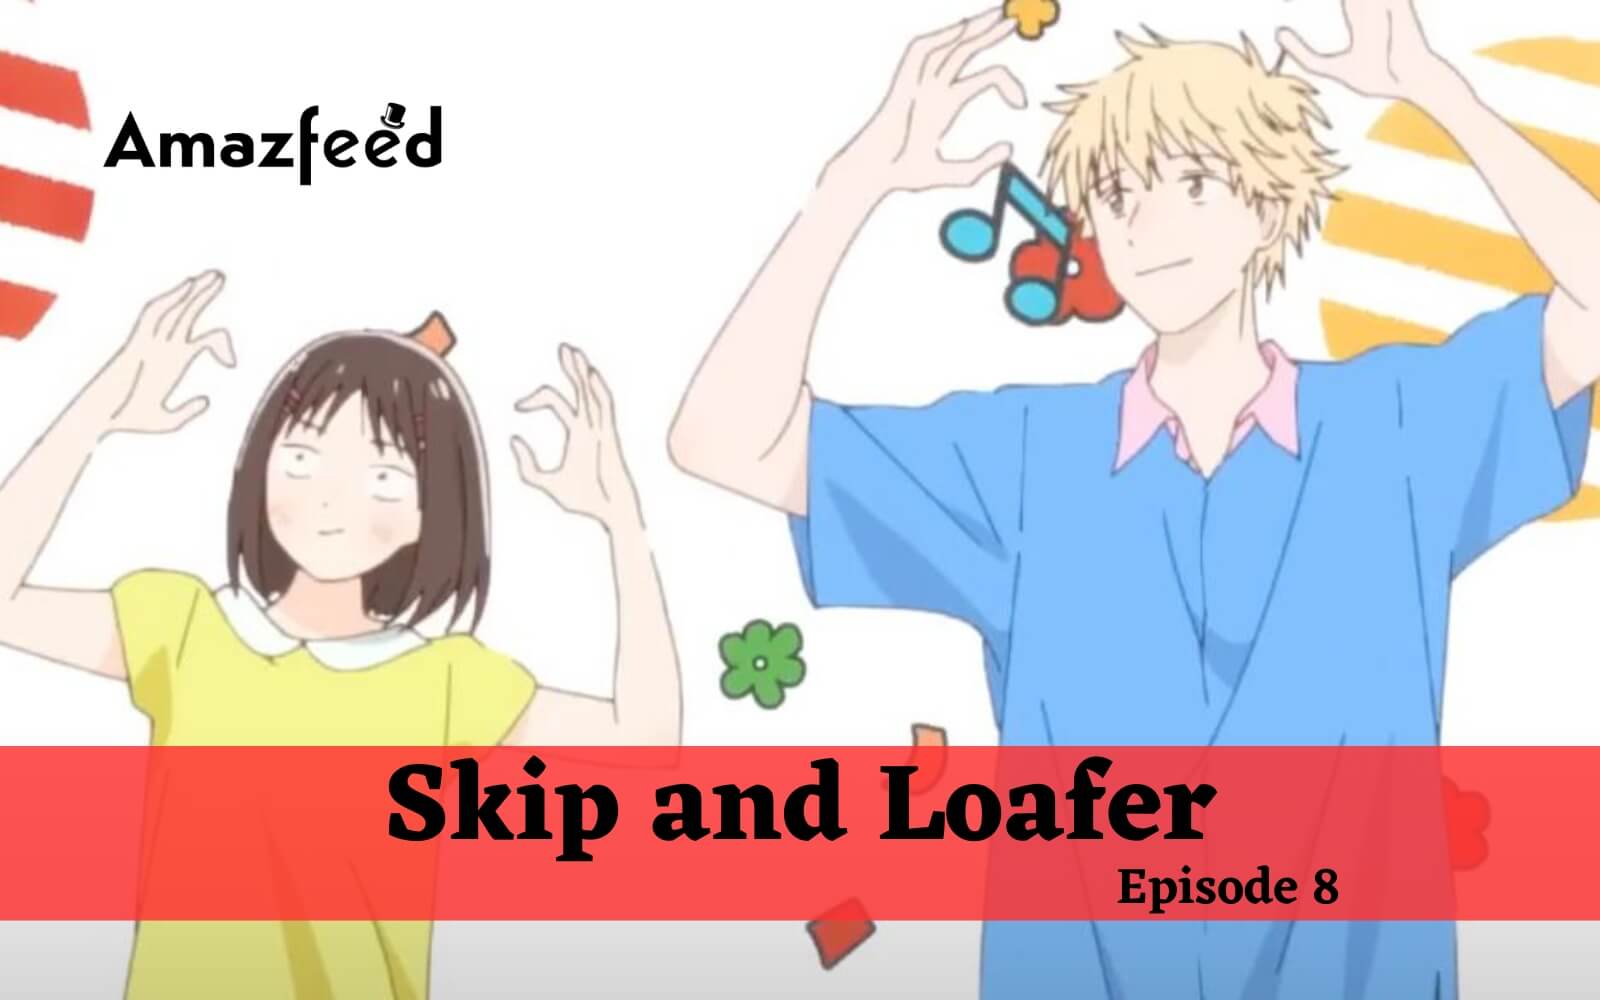 Skip and Loafer Season 2 Release Date News, Plot, and Predictions